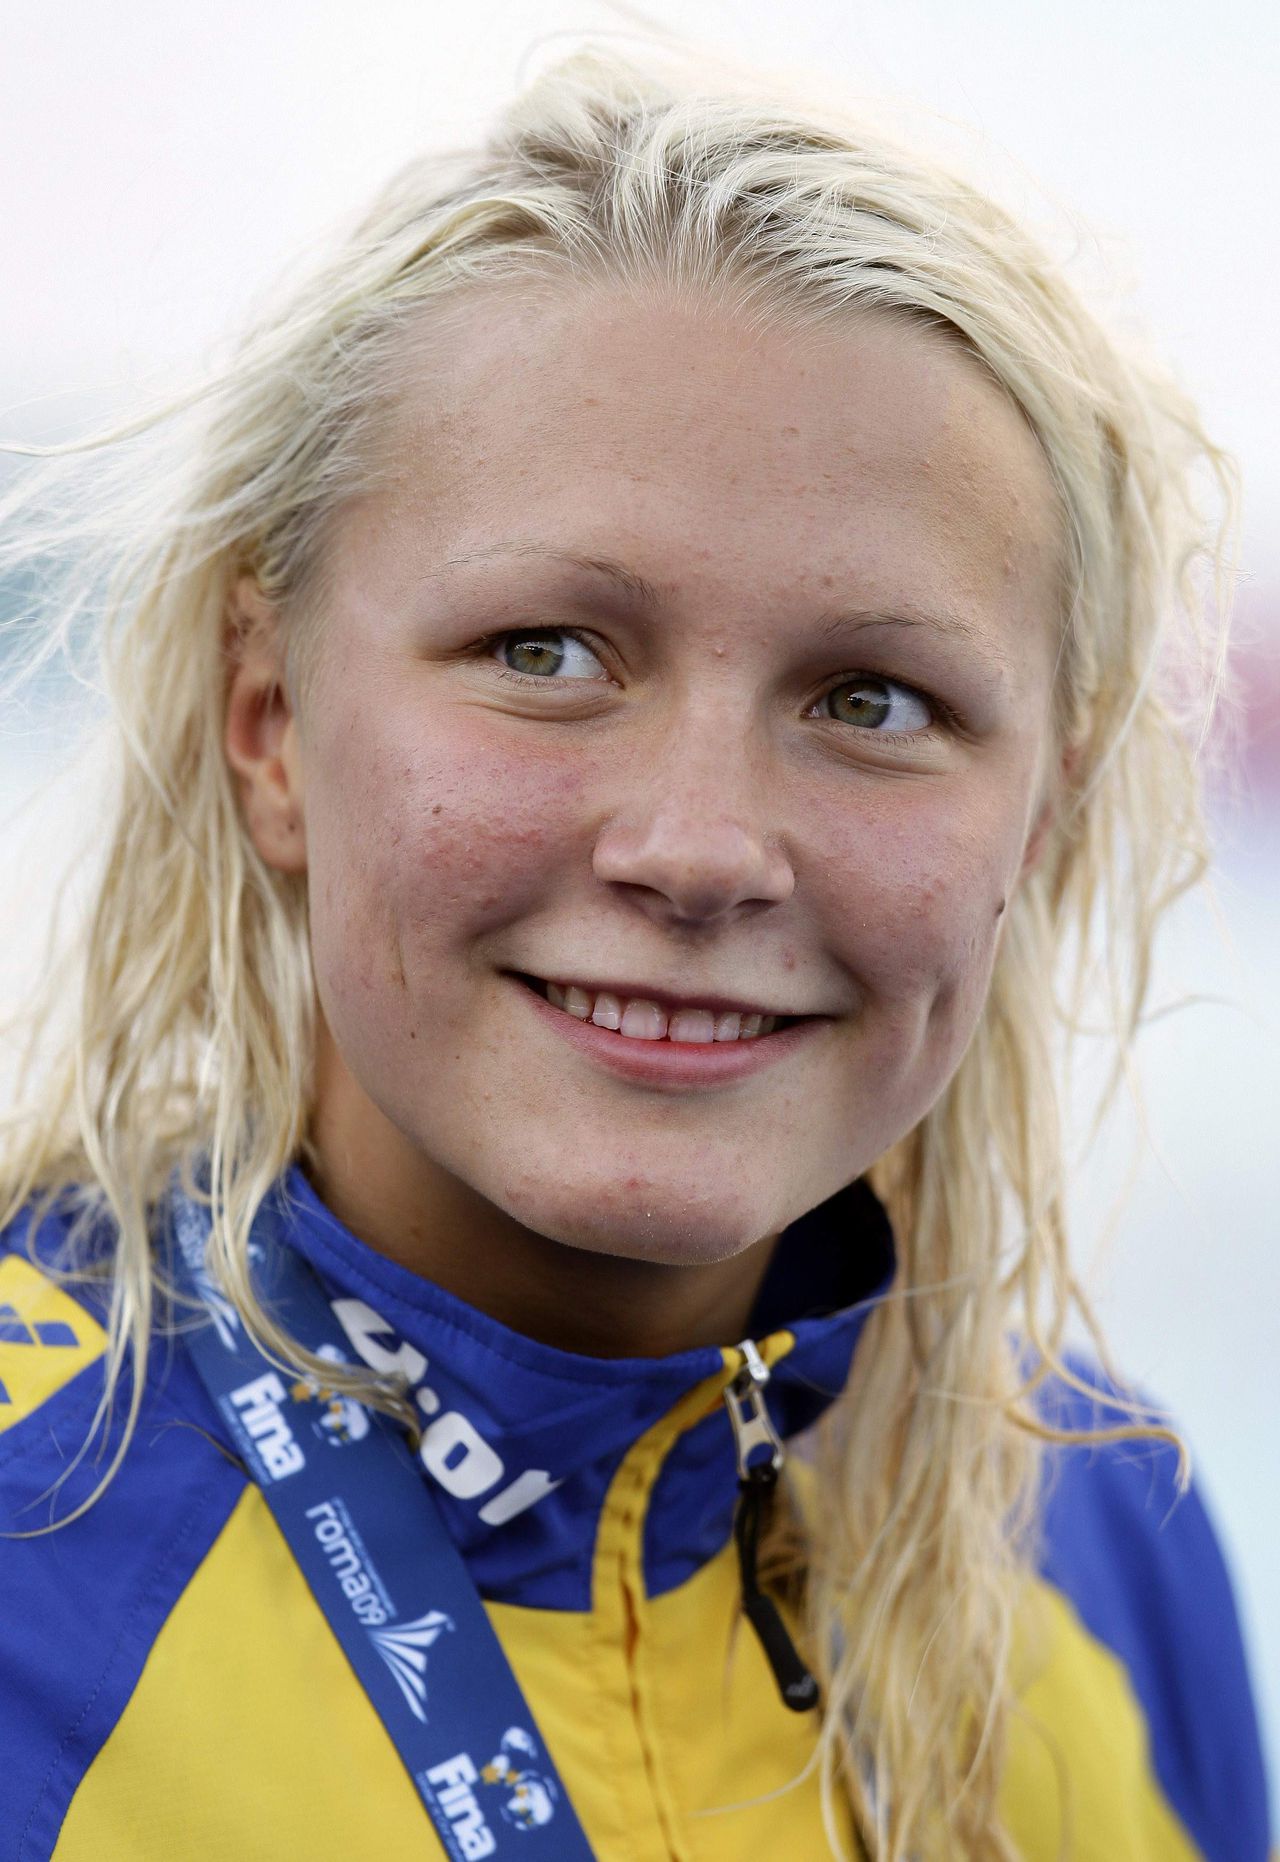 Sarah Sjöström Foto Reuters Sarah Sjostrom smiles on the podium after winning gold medal in women's 100m butterfly swimming final at the World Championships in Rome July 27, 2009. REUTERS/Tony Gentile (ITALY SPORT SWIMMING)